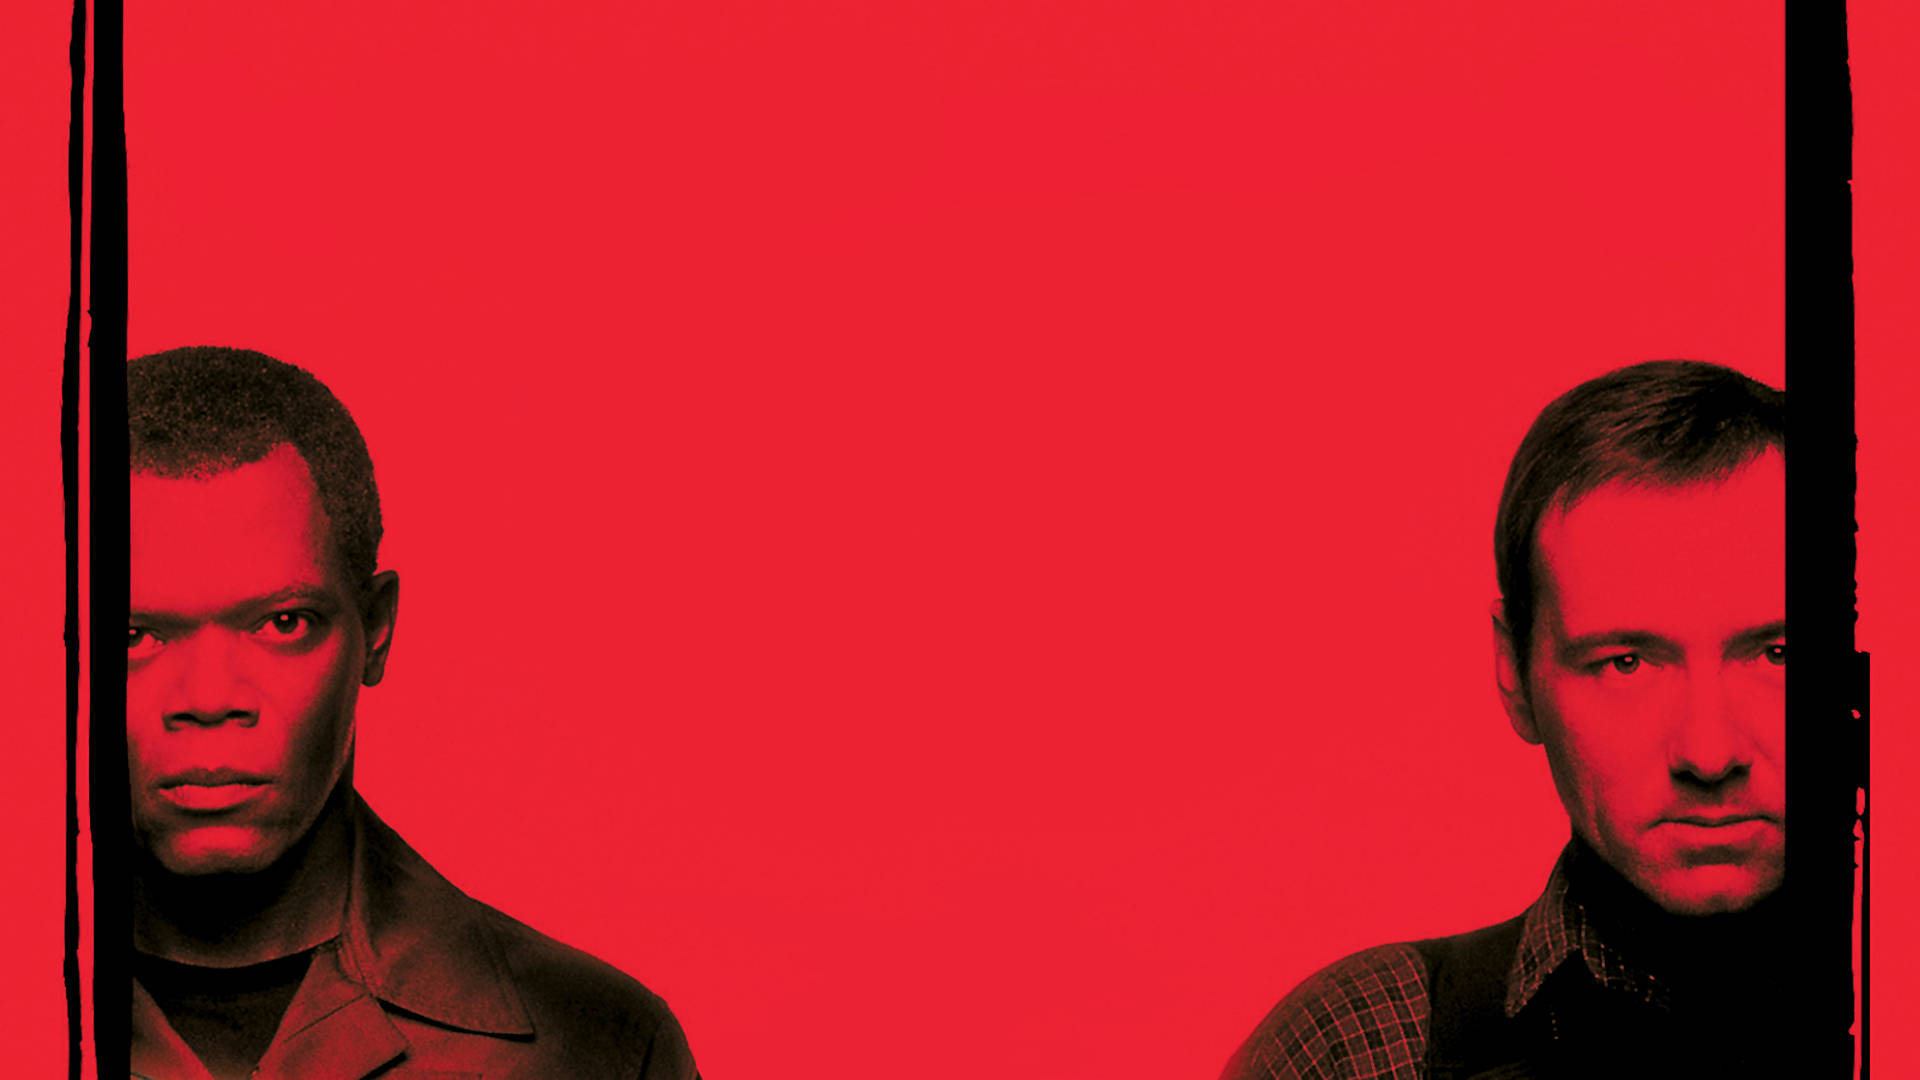 Samuel L Jackson And Kevin Spacey Wallpaper